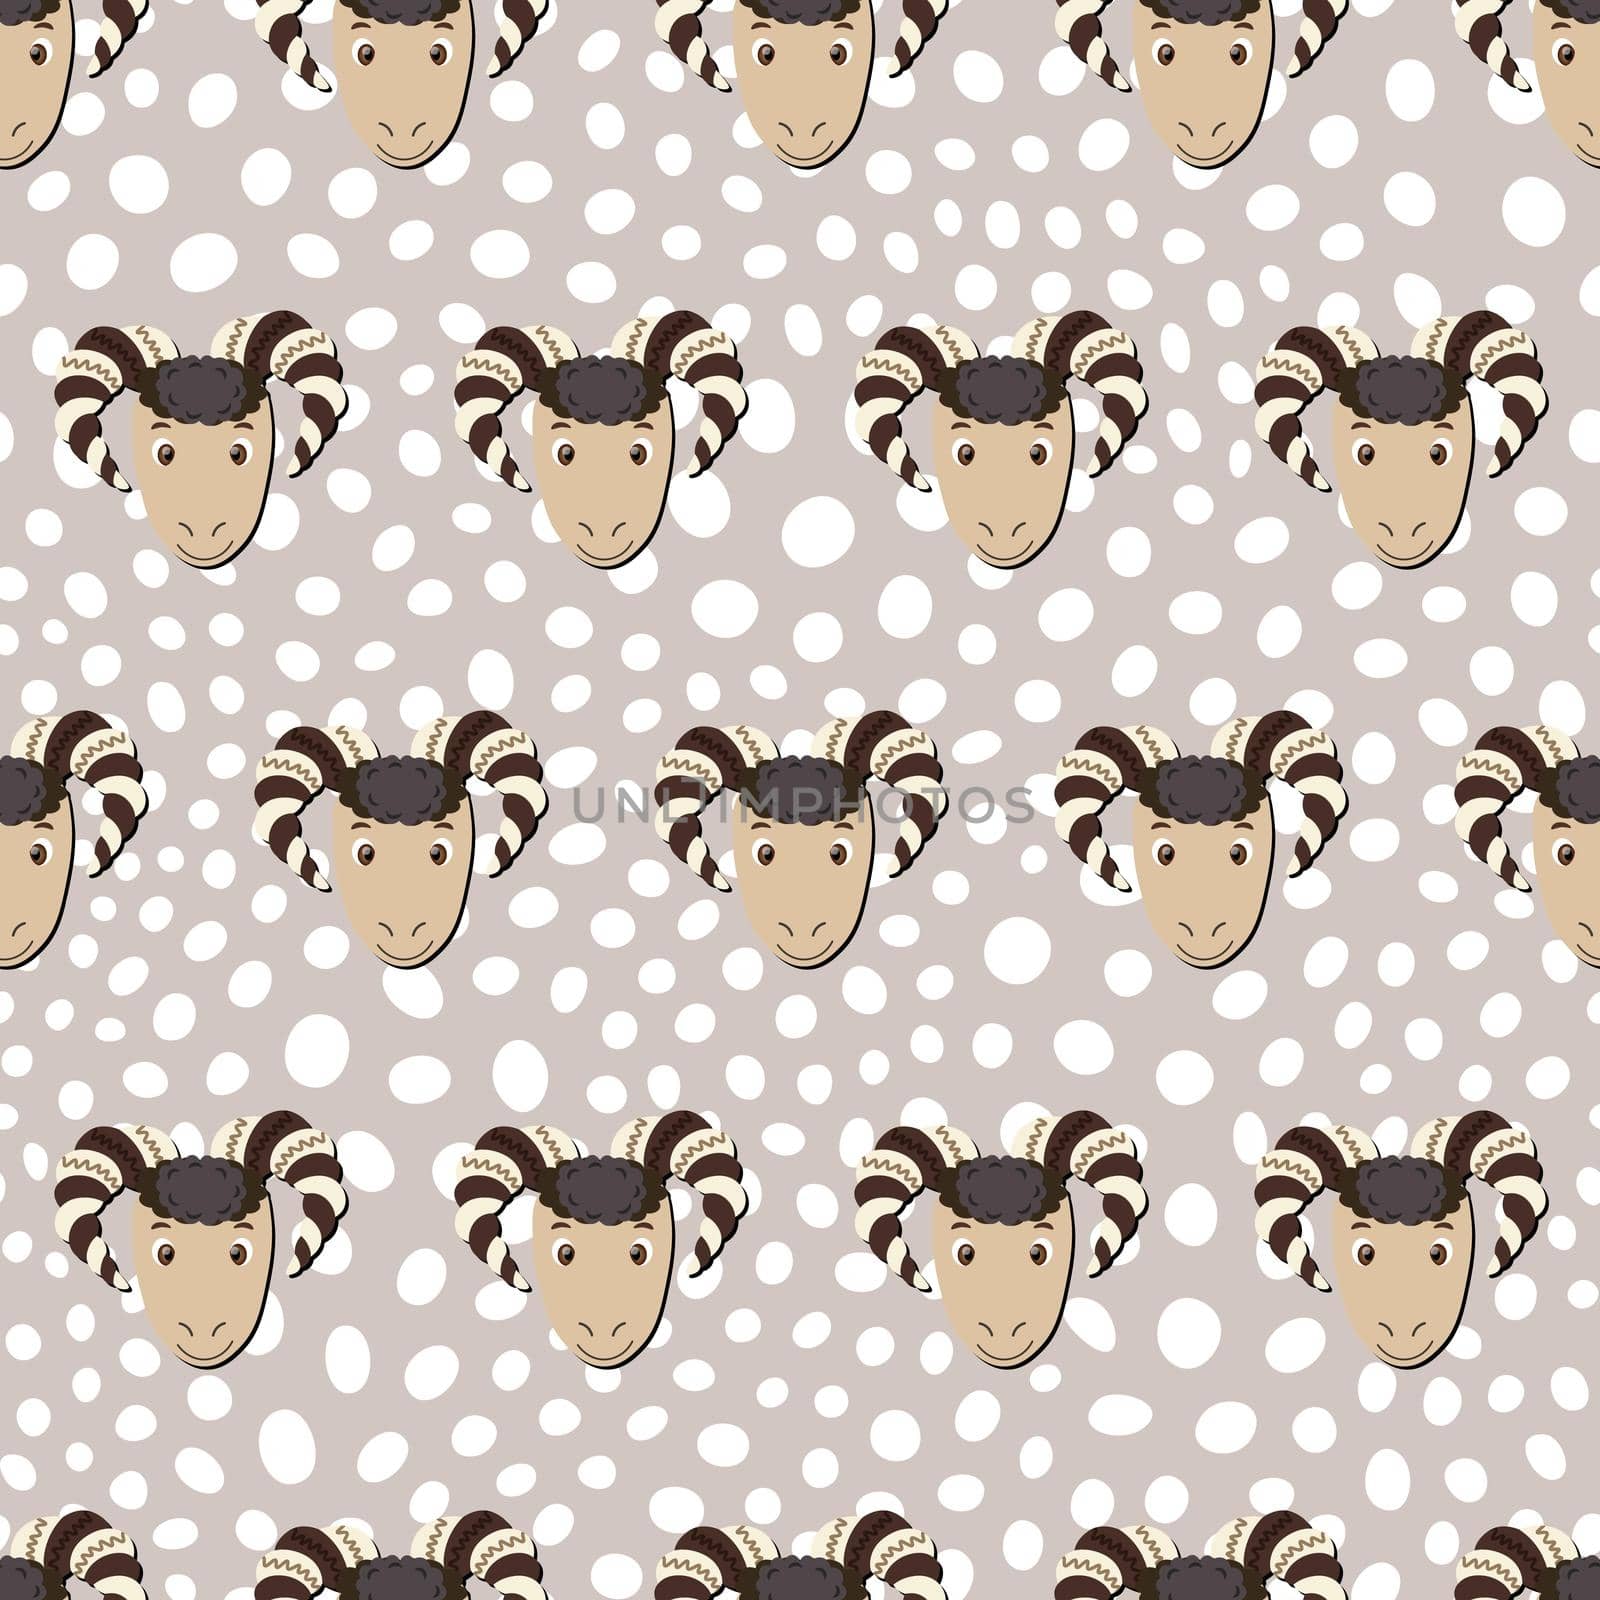 Vector flat animals colorful illustration for kids. Seamless pattern with ram face on beige polka dots background. Cute sheep. Adorable cartoon character. Design for textures, card, fabric, textile